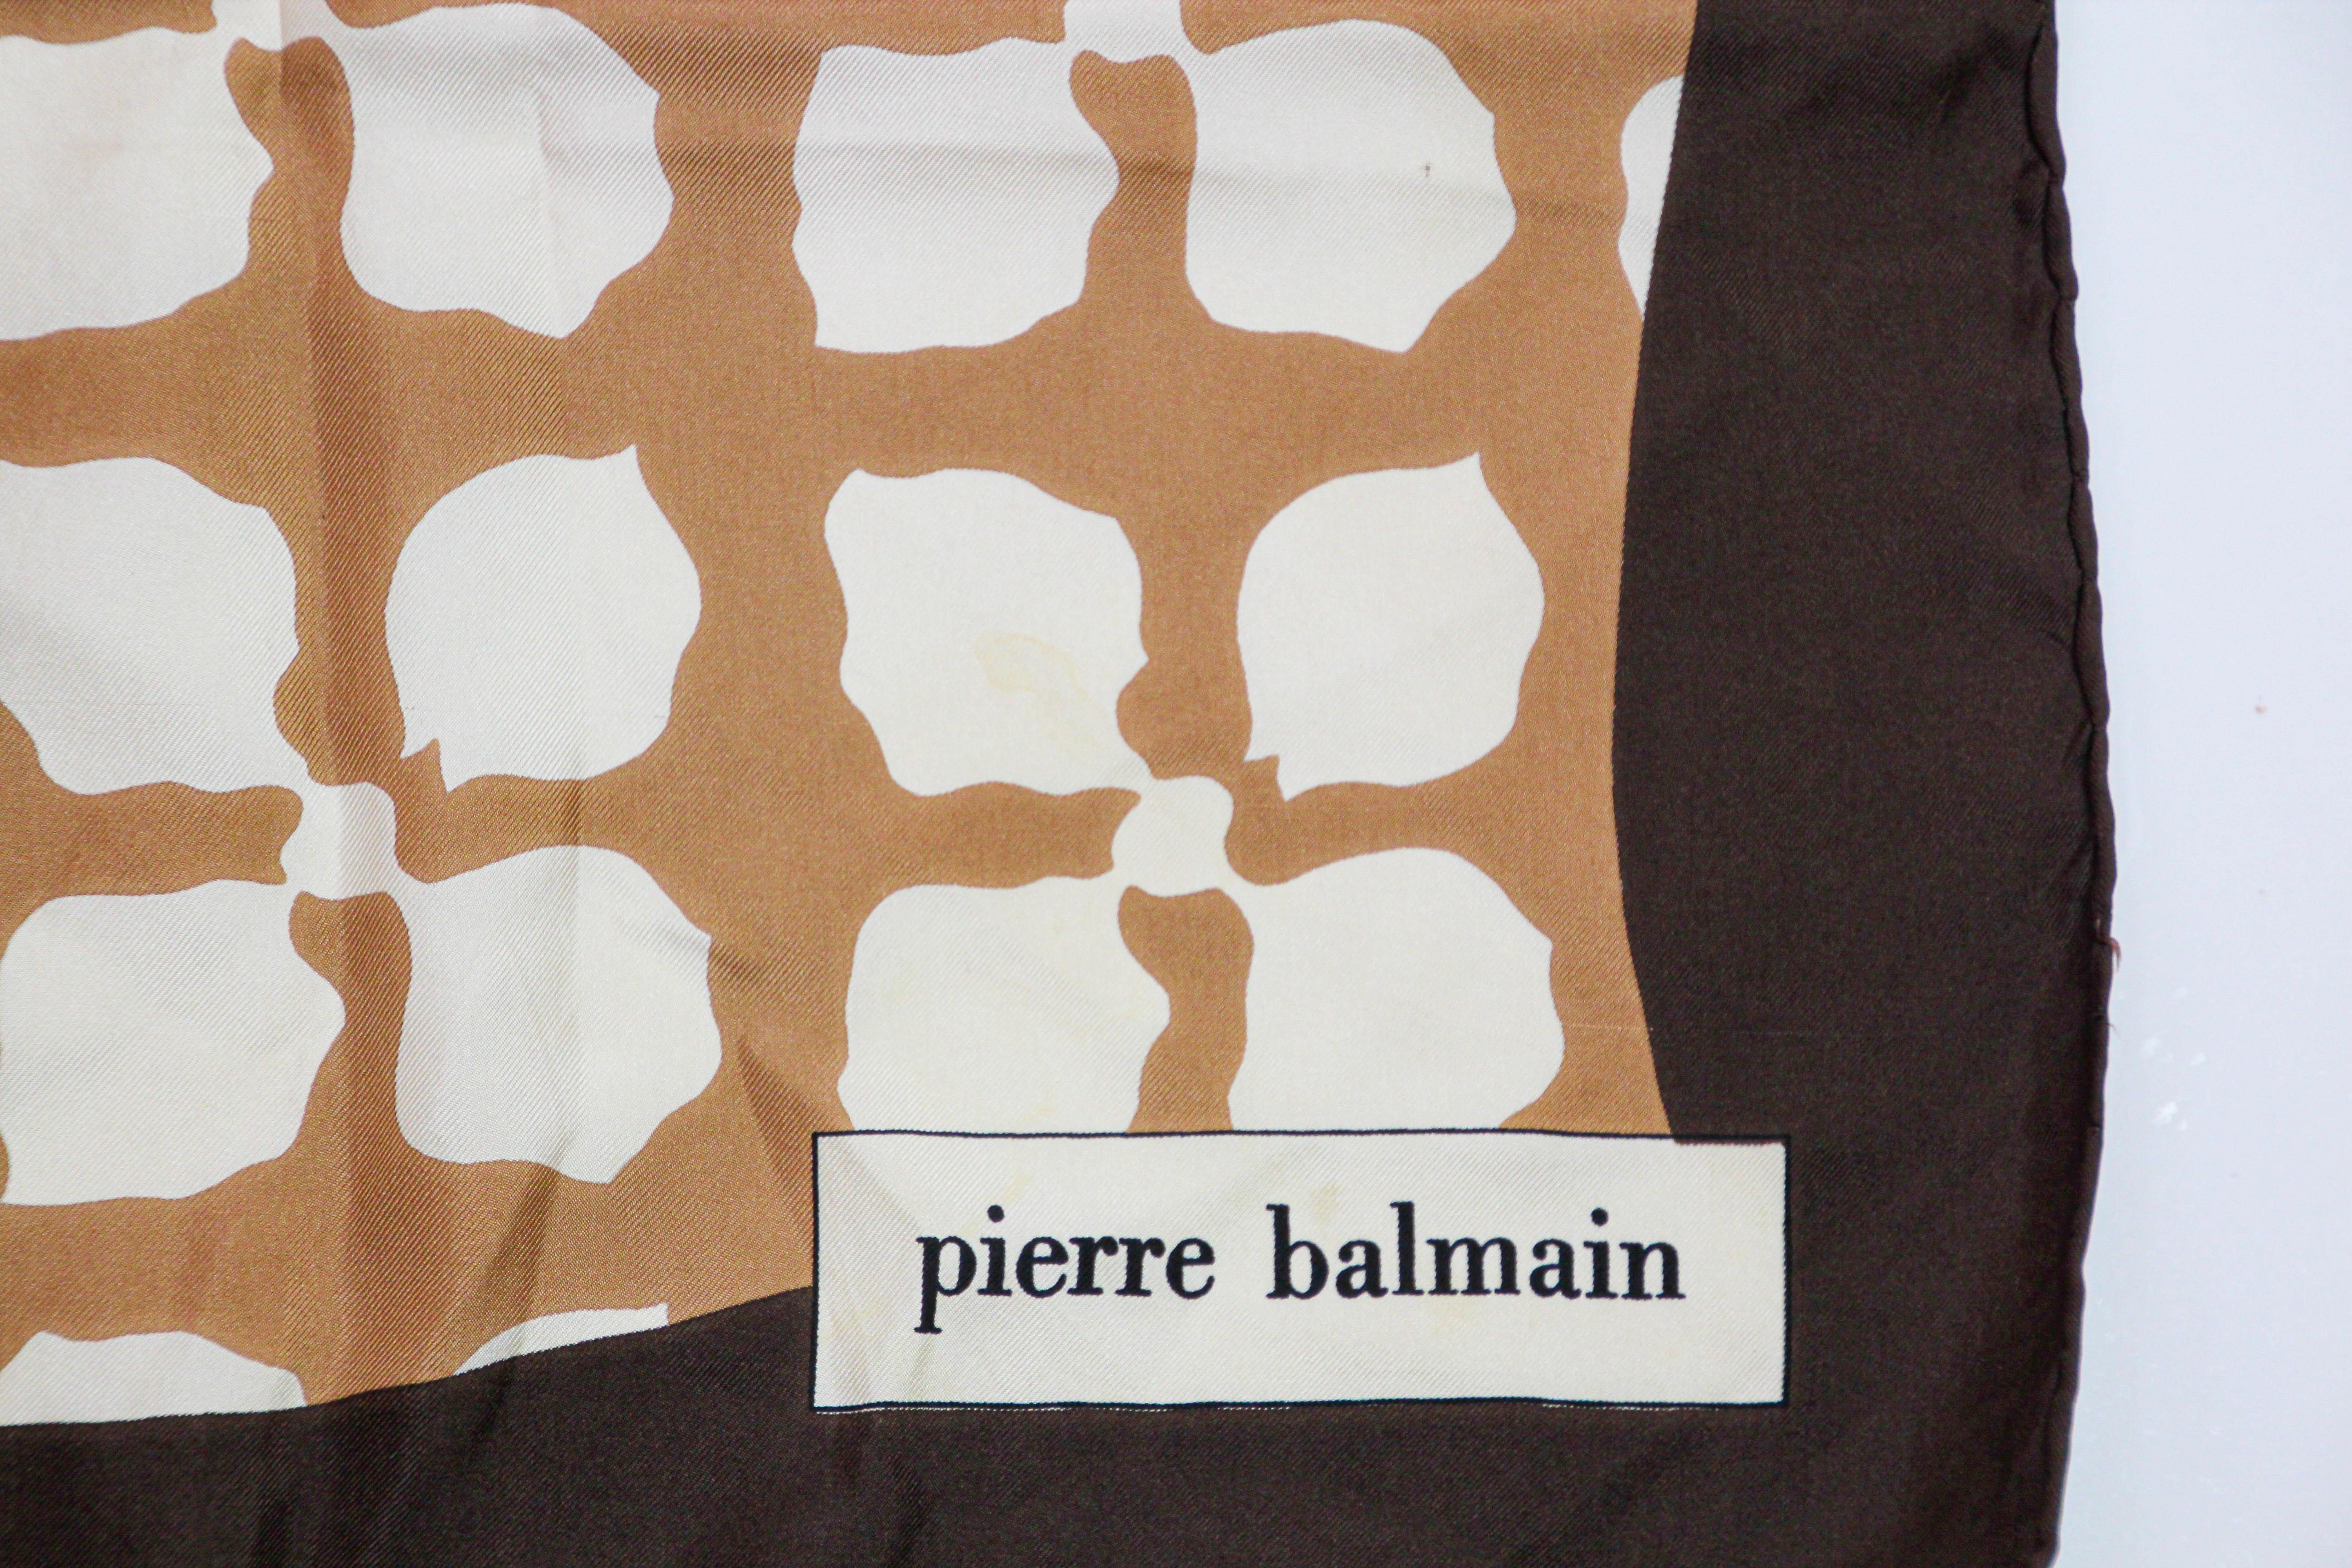 Vintage Pierre Balmain brown silk scarf.
Carre silk foulard accessories by Pierre Balmain Couture Paris.
Designed by French designer Pierre Balmain.
Floral abstract post modern design silk hand rolled hem along the sides.
Great gift 100 % silk,